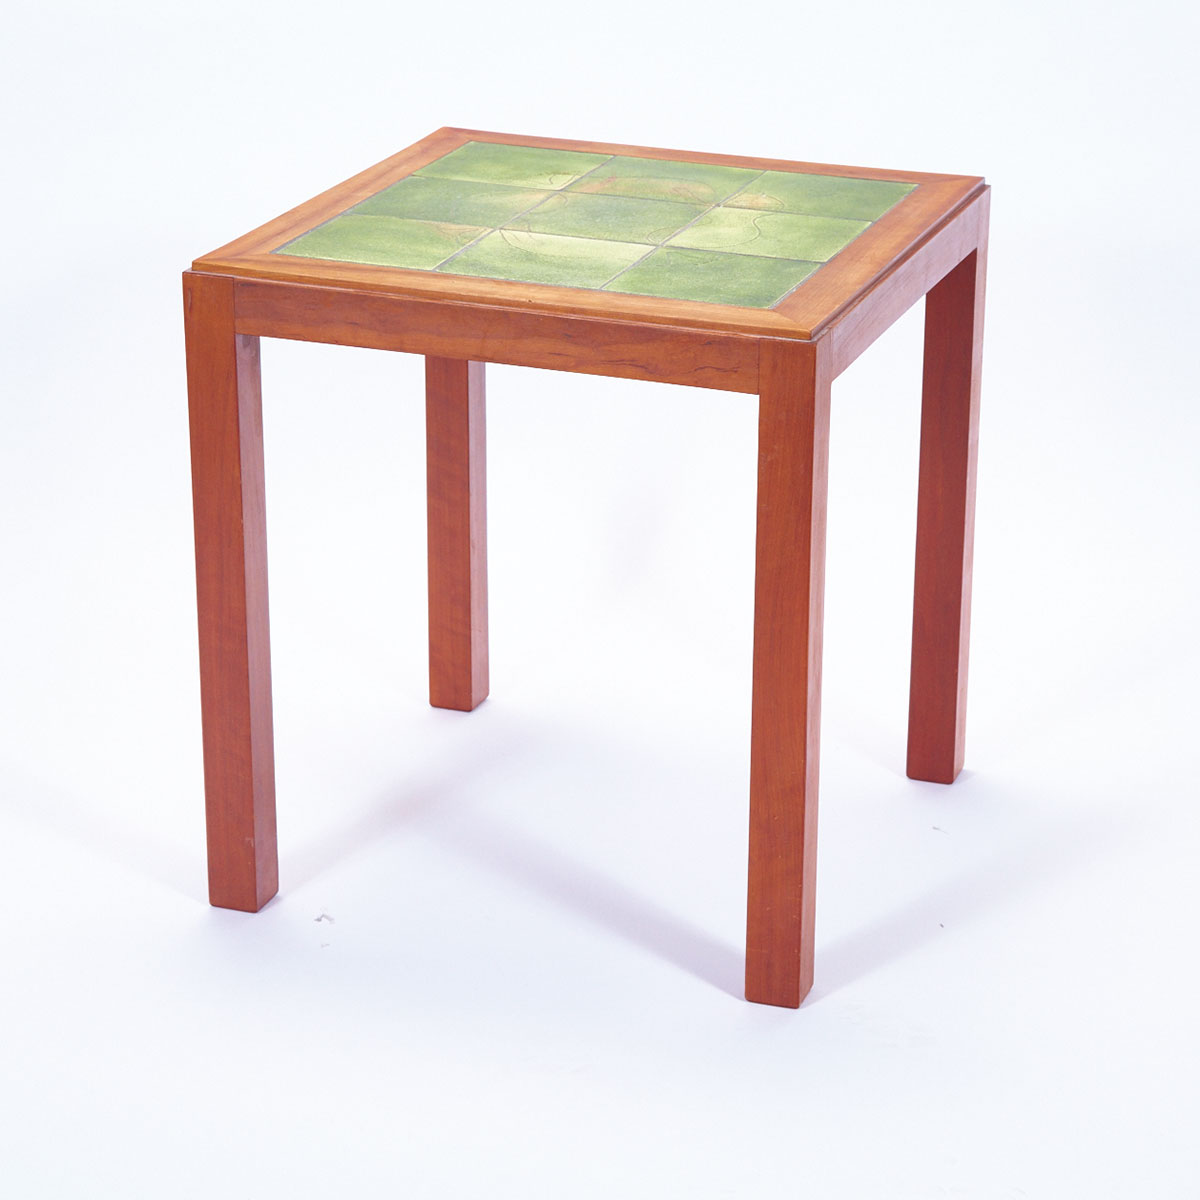 Brooklin Pottery Tile Topped End Table, Theo, Susan and Ben Harlander, 1960s